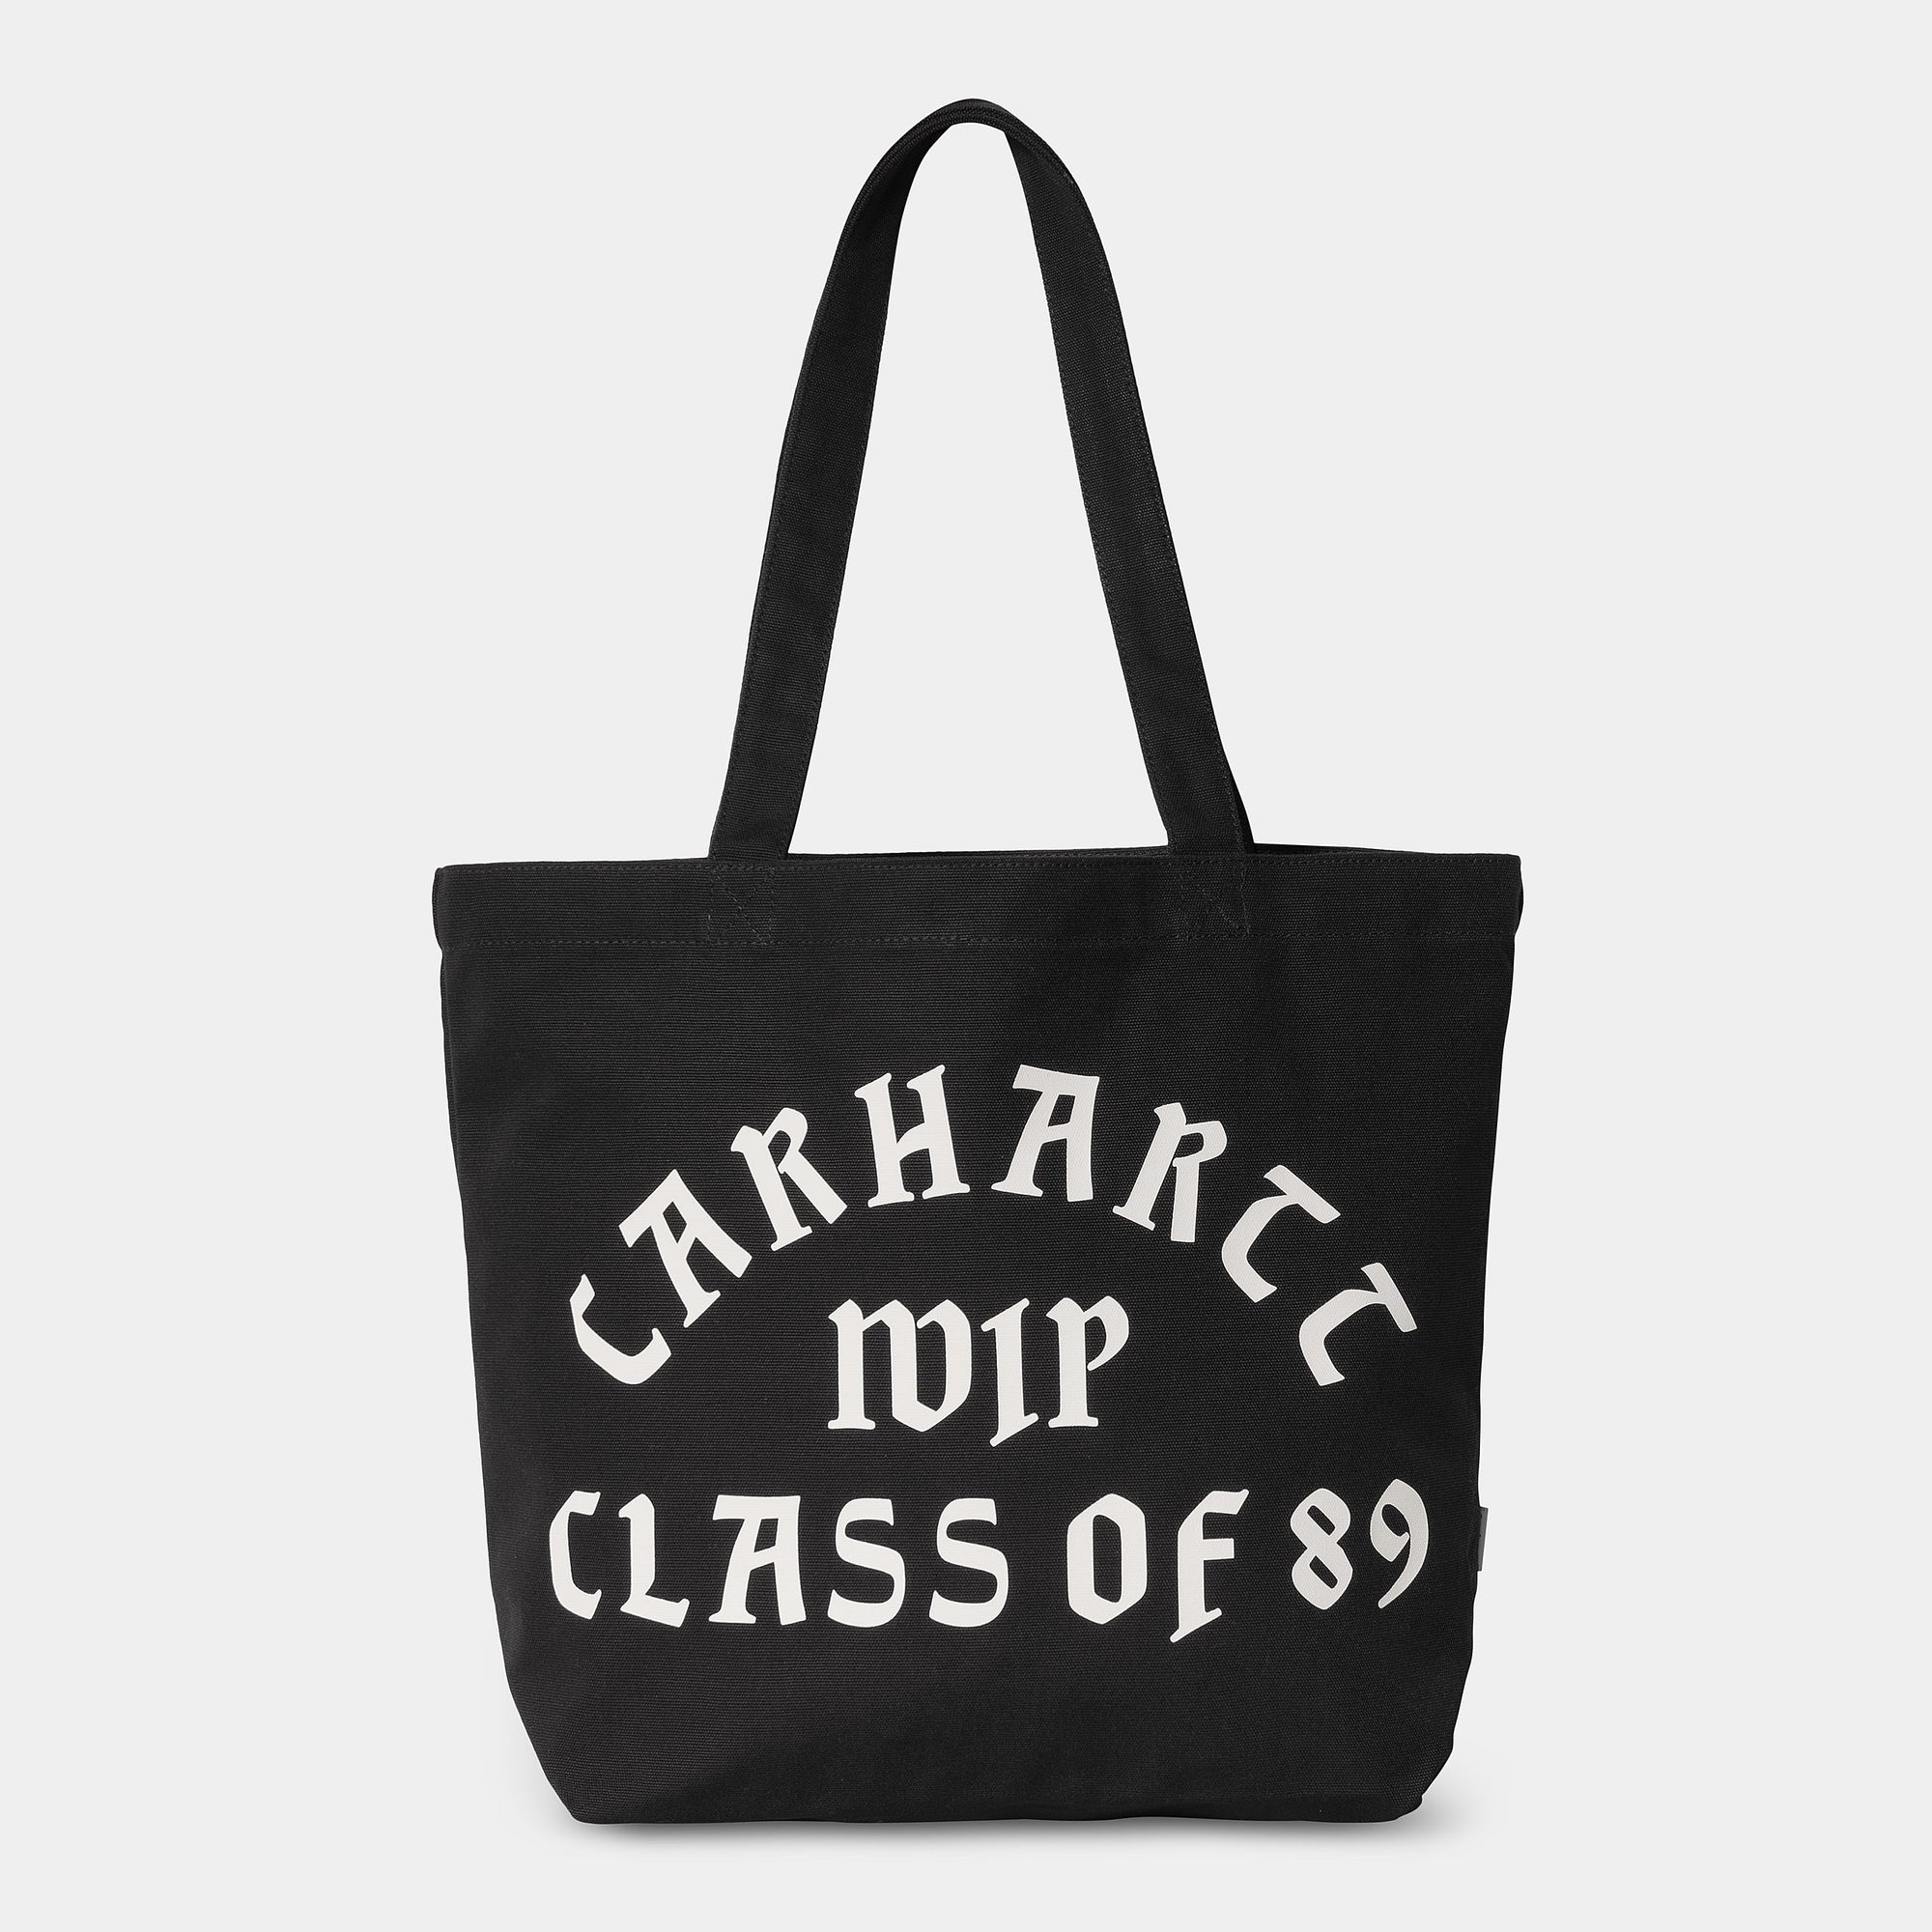 Carhartt WIP Canvas Graphic Tote - Class of 89 Print